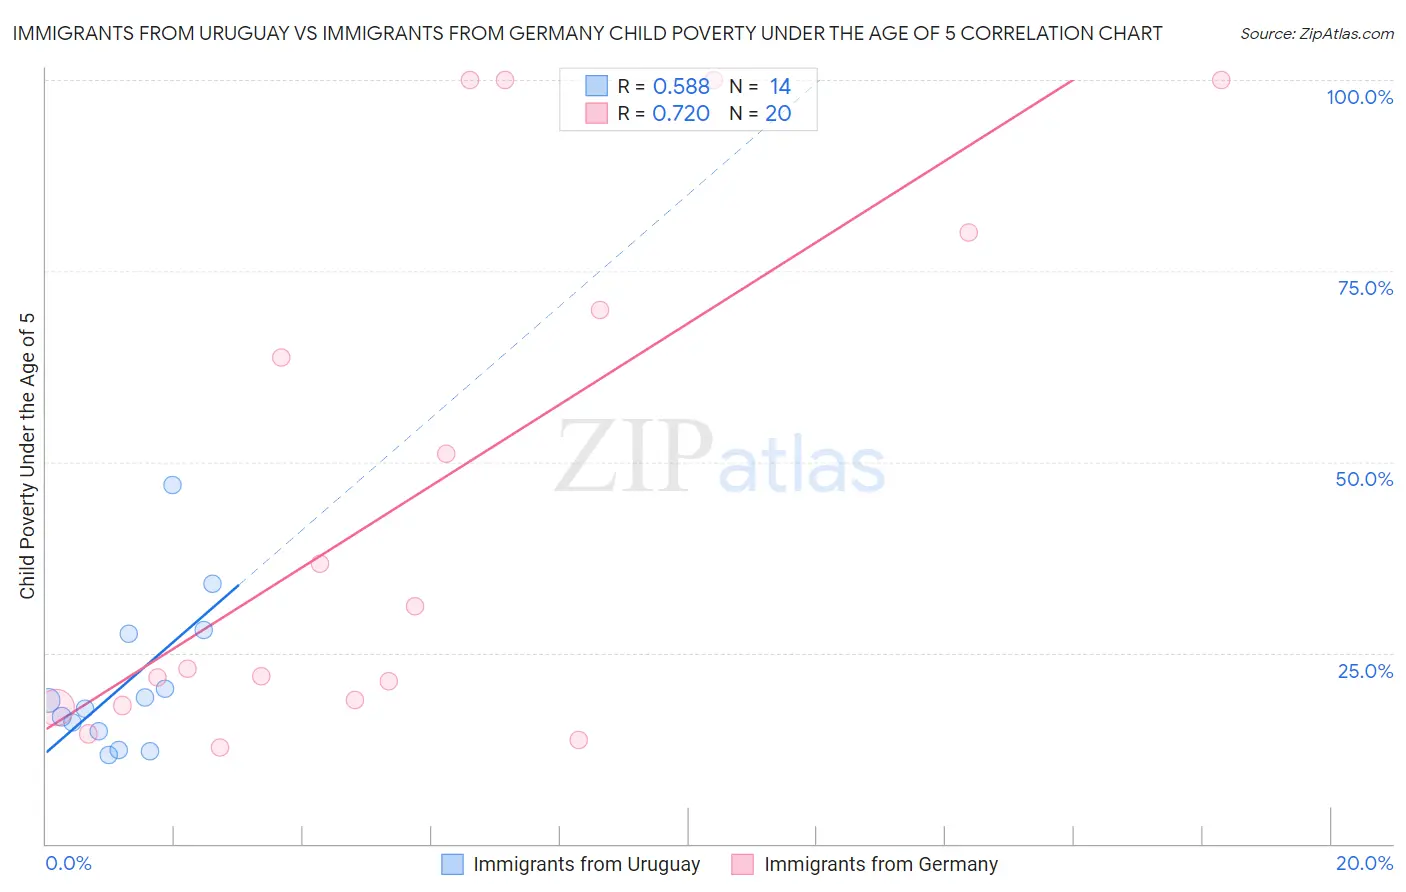 Immigrants from Uruguay vs Immigrants from Germany Child Poverty Under the Age of 5